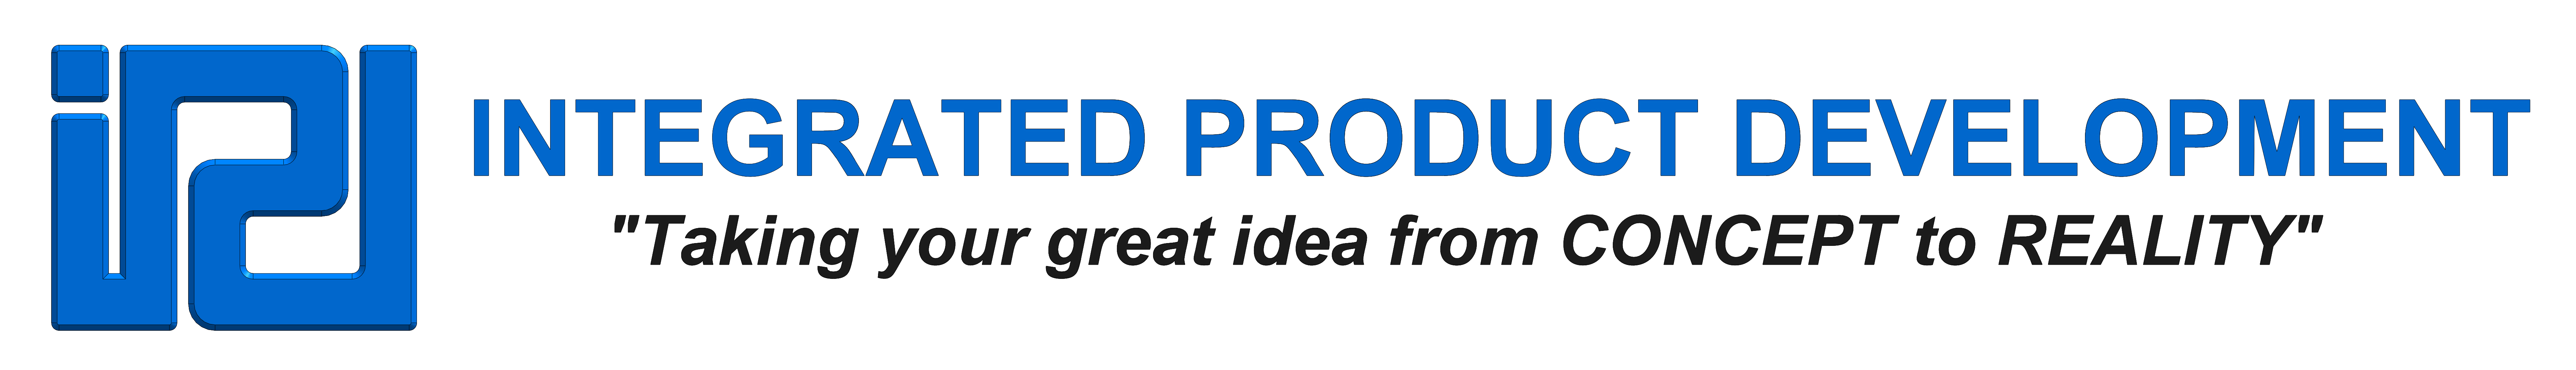 INTEGRATED PRODUCT DEVELOPMENT